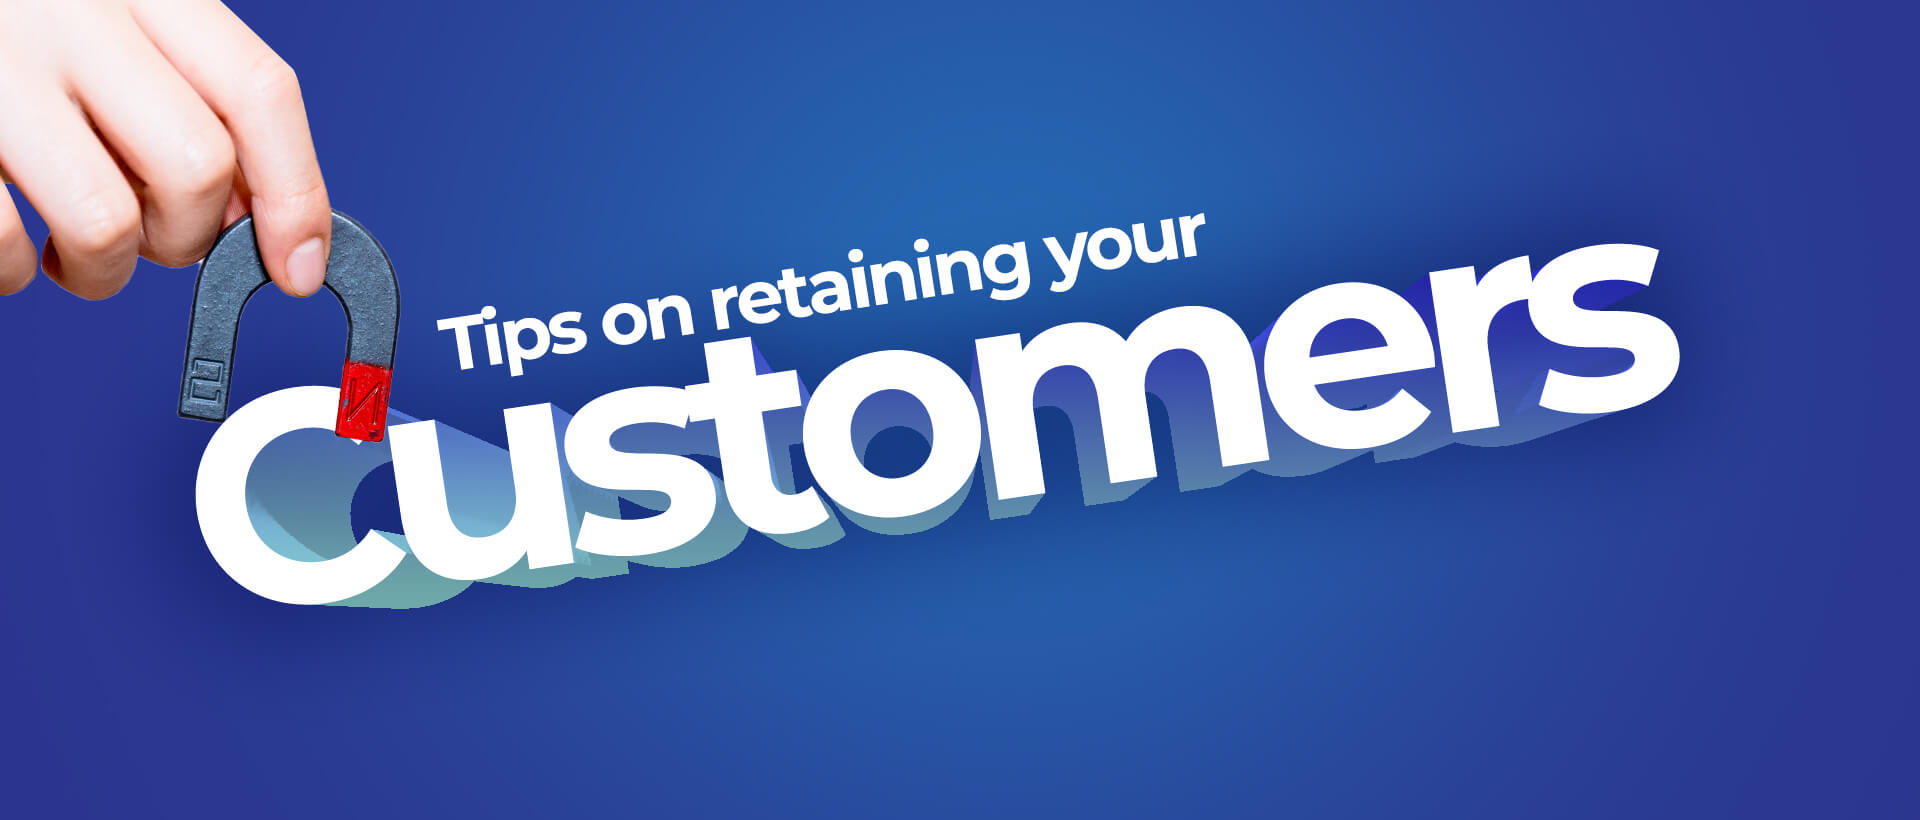 Tips on retaining your customers